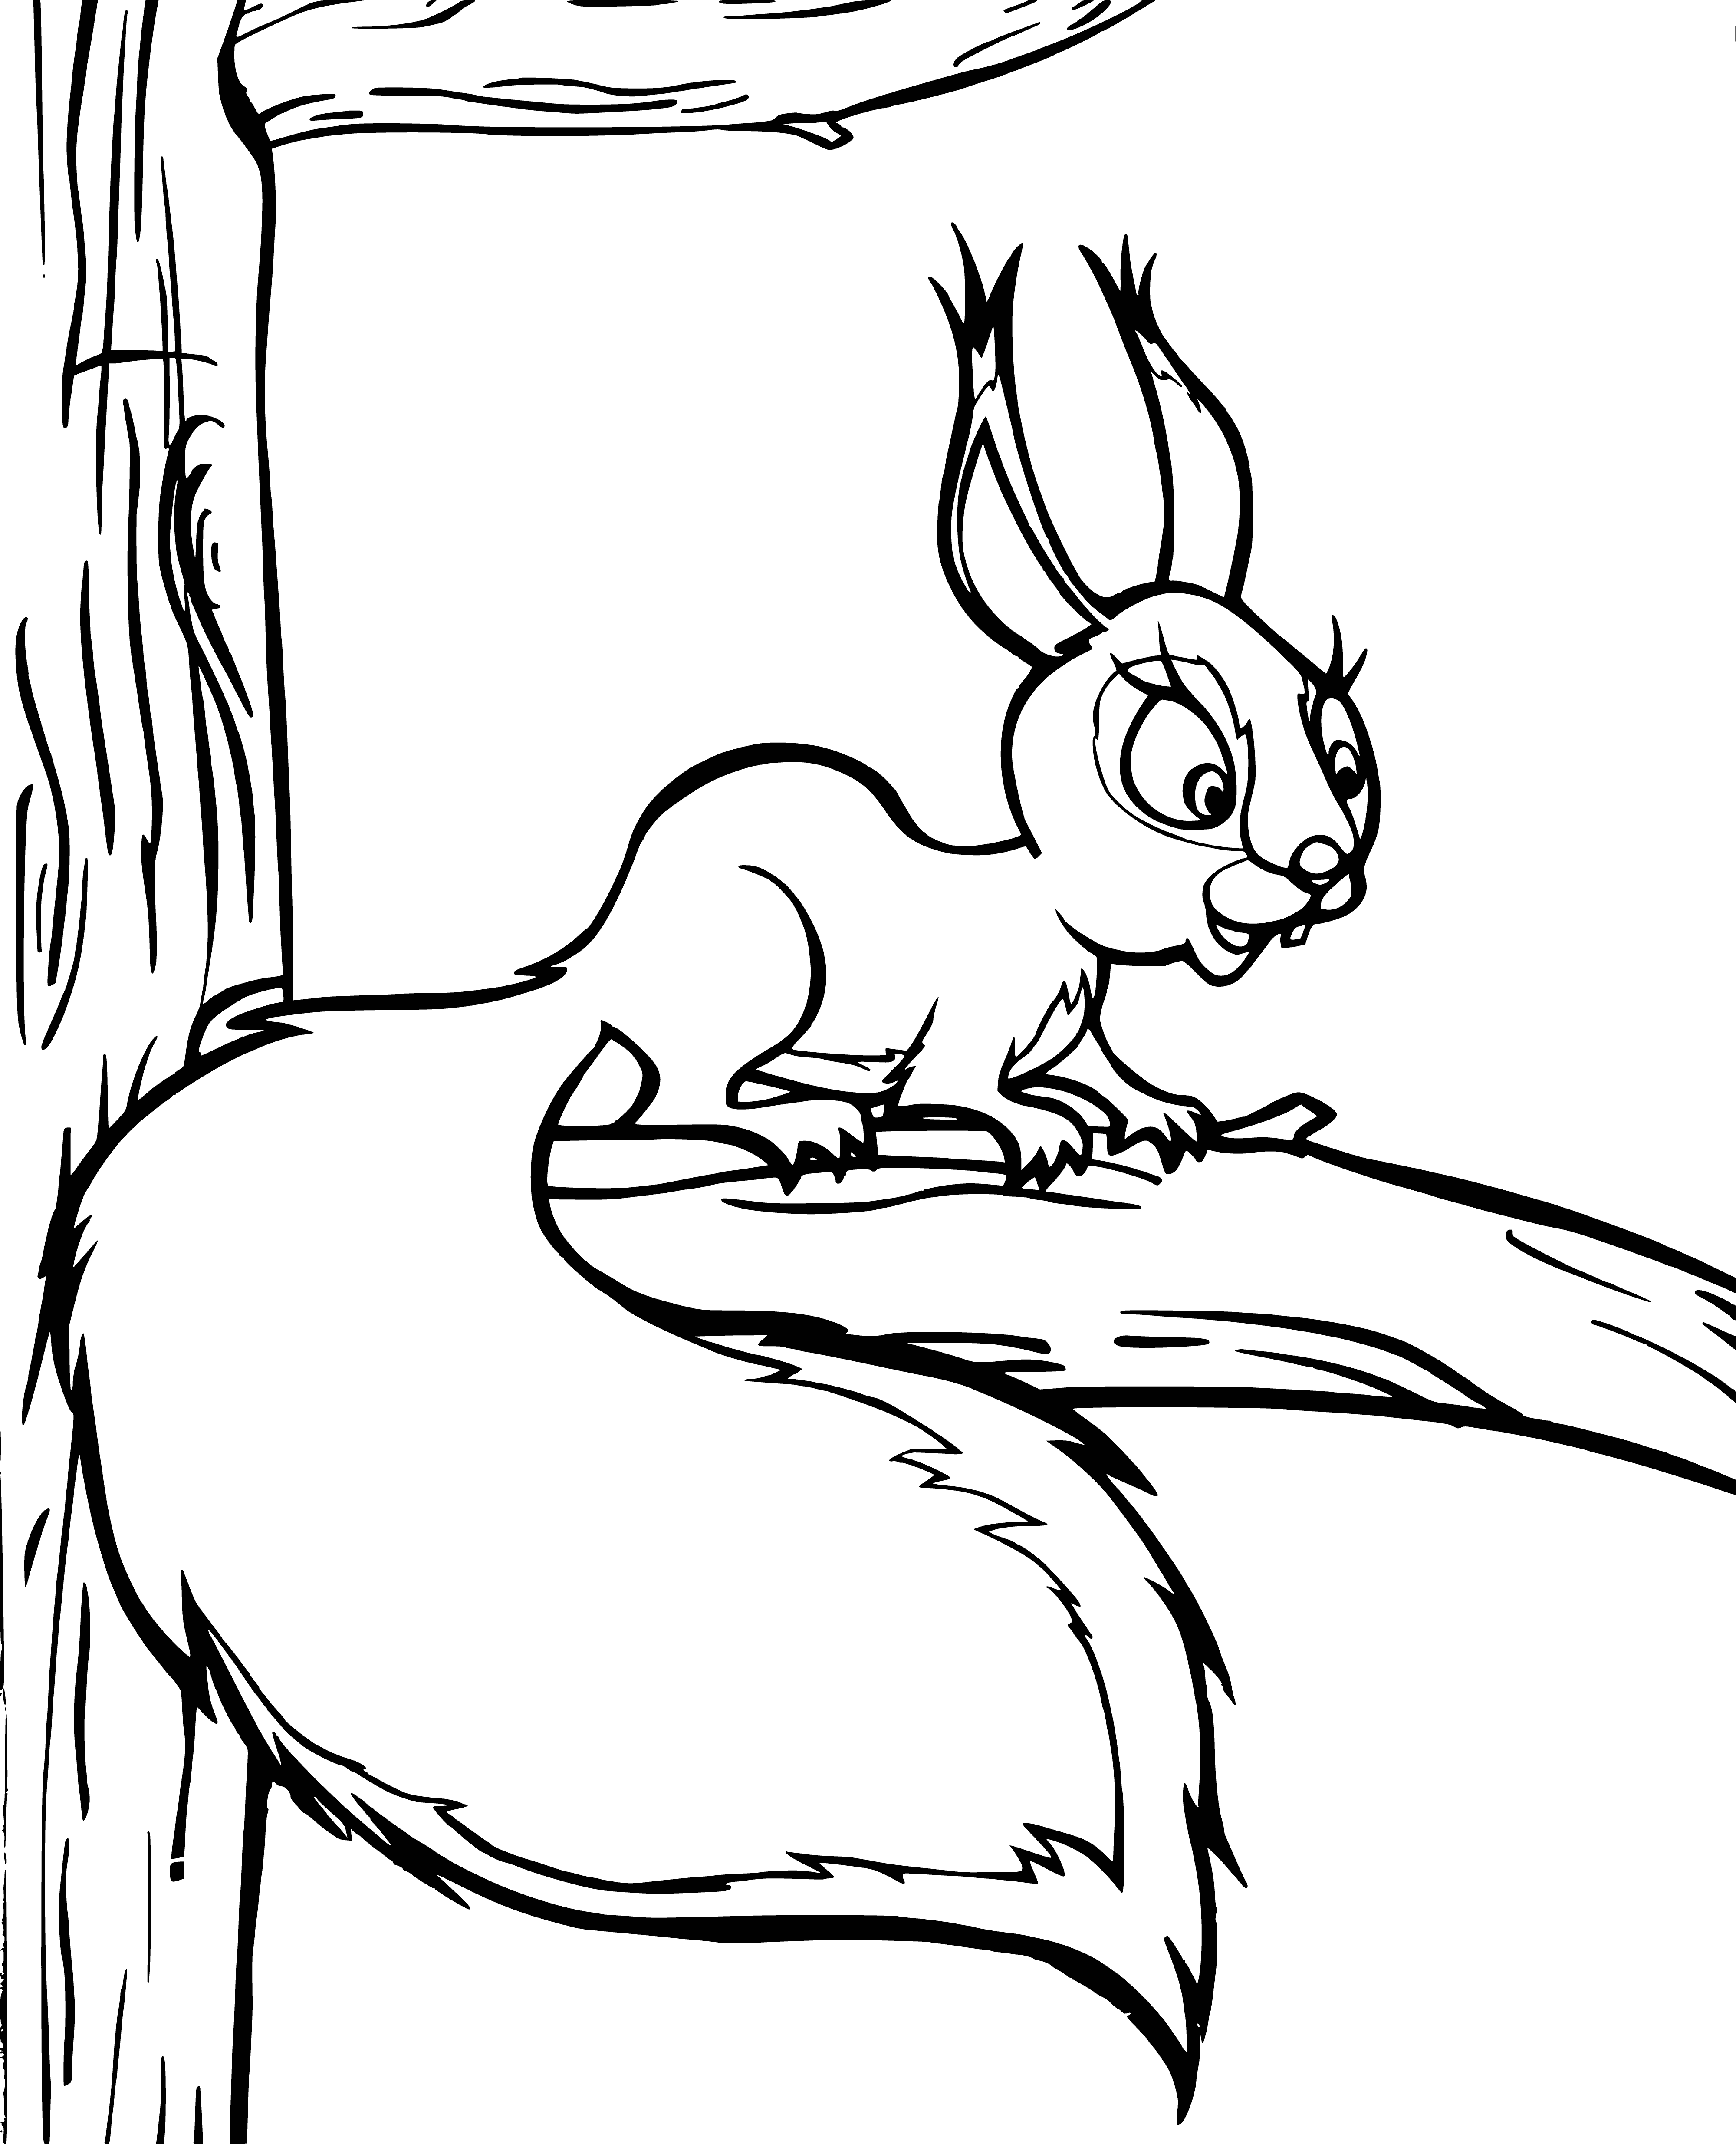 coloring page: A friendly squirrel perched atop an acorn, its tail wrapped and ears perked, looks up with big brown eyes.